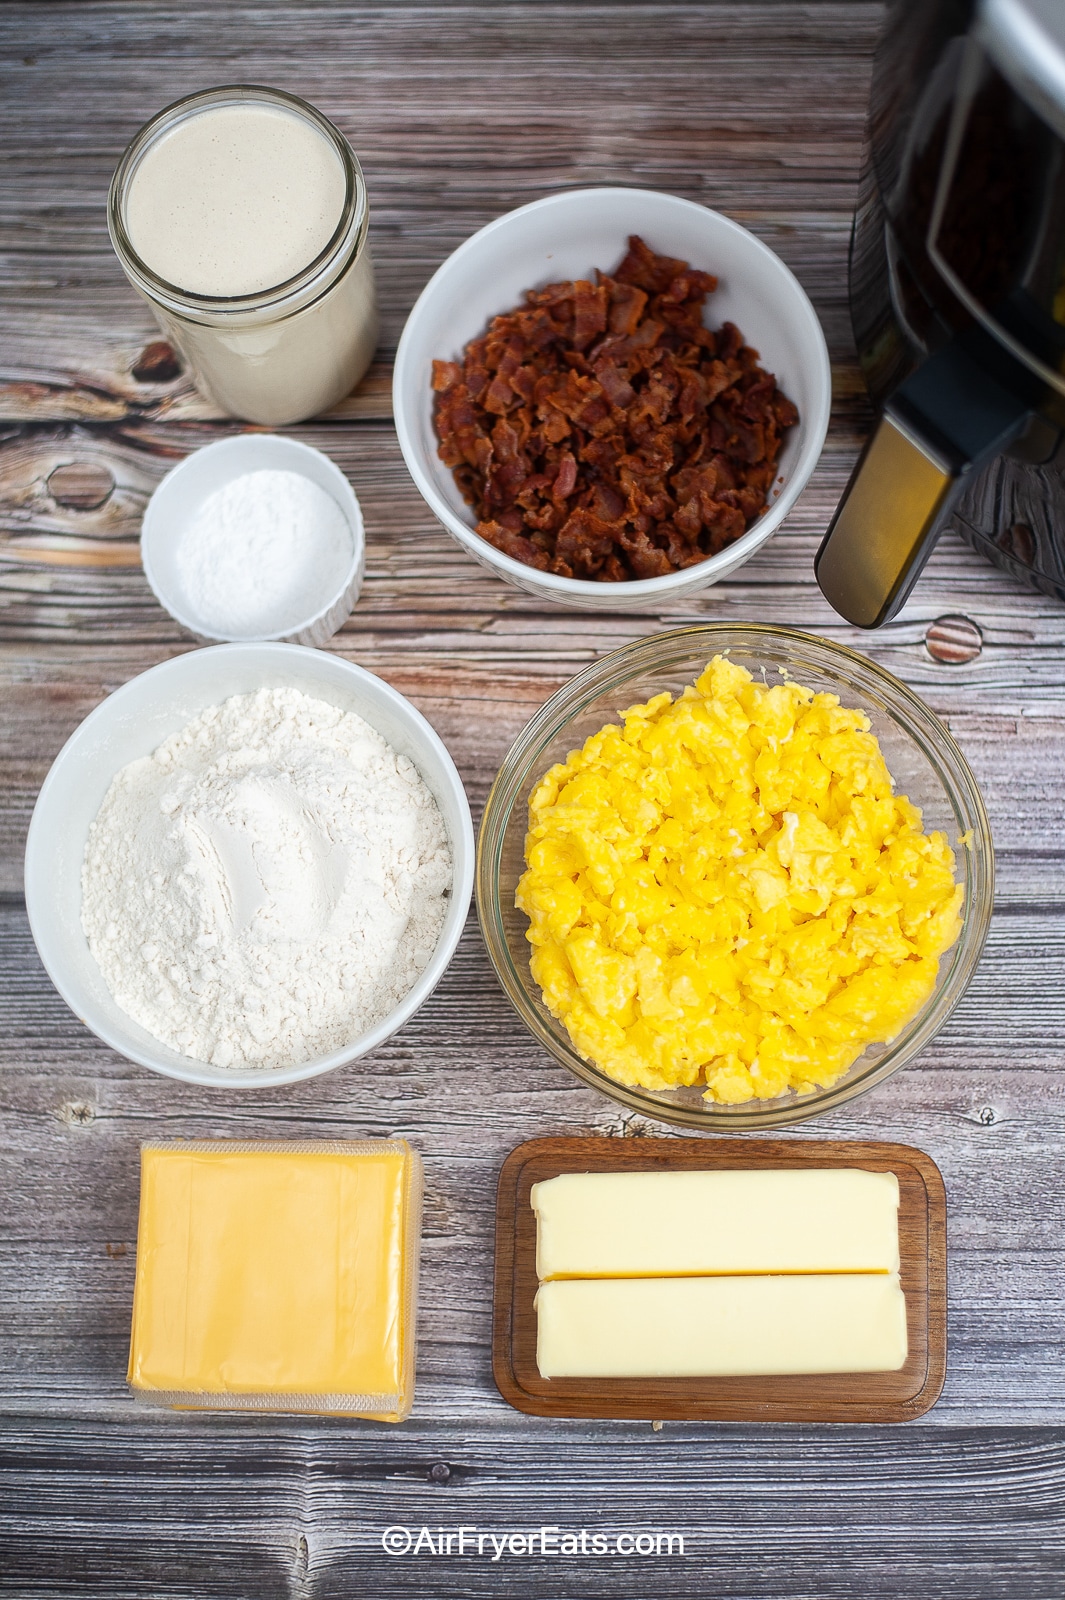 Overhead shot of ingredients required for air fryer egg and bacon stuffed biscuits: Flour, butter, milk, eggs, bacon and cheese